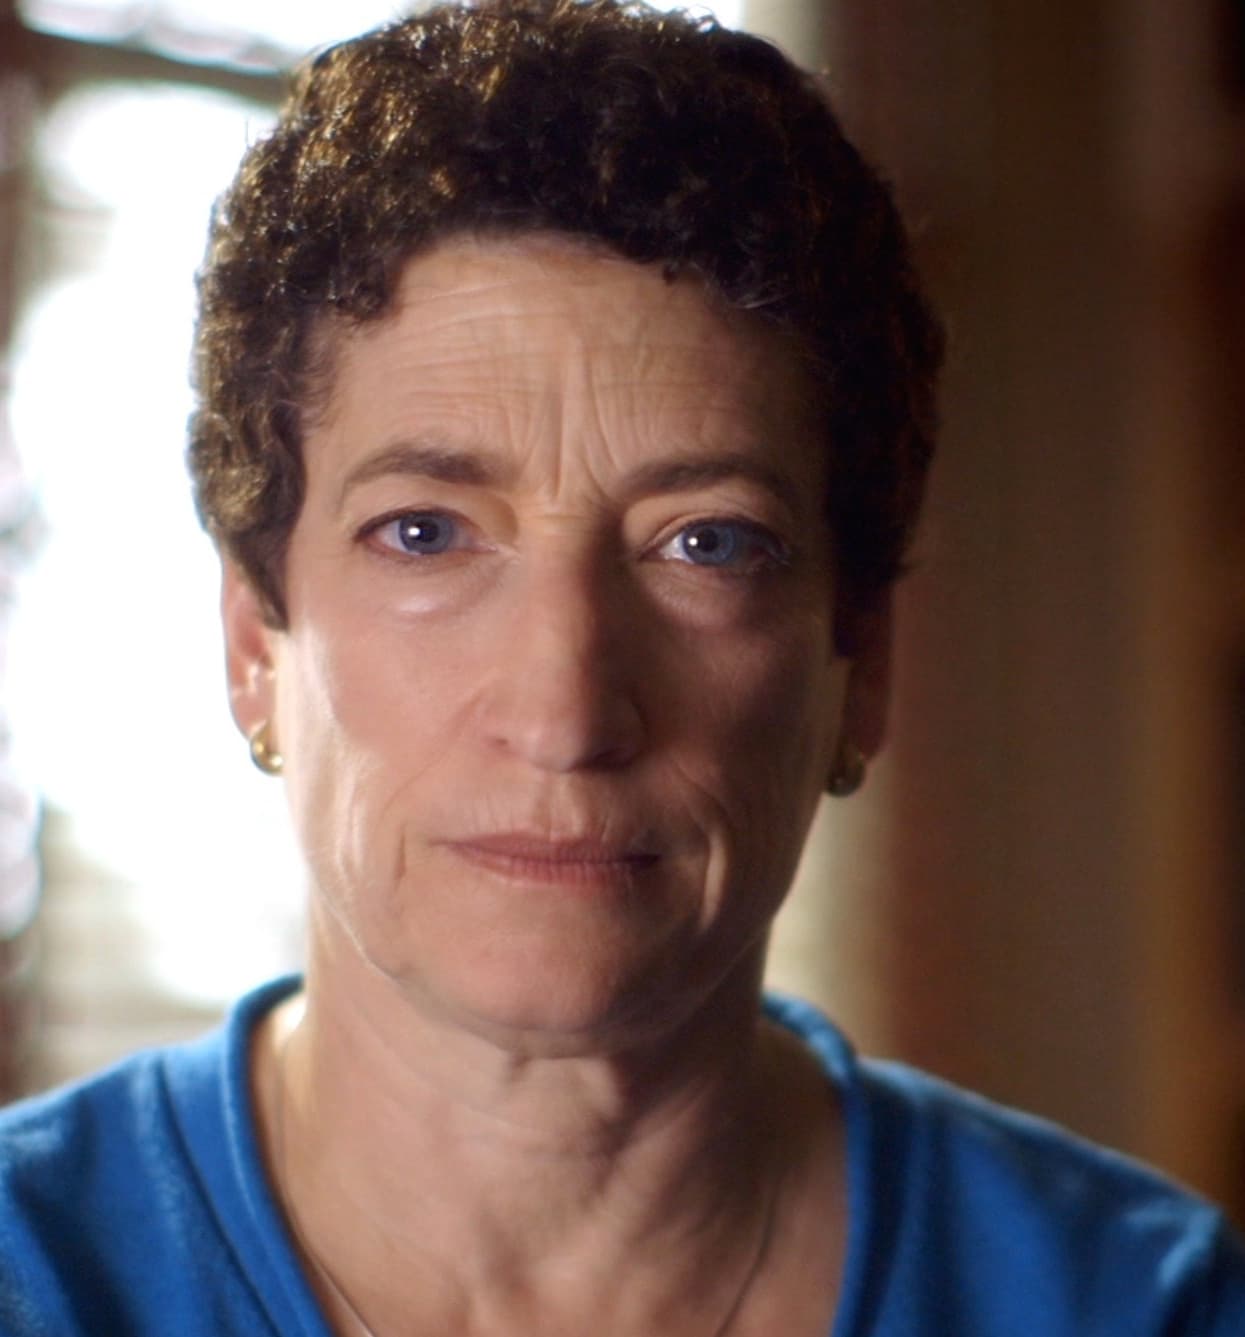 Naomi Oreskes, author of the book "Merchants of Doubt." (Courtesy of Sony Pictures Classics)